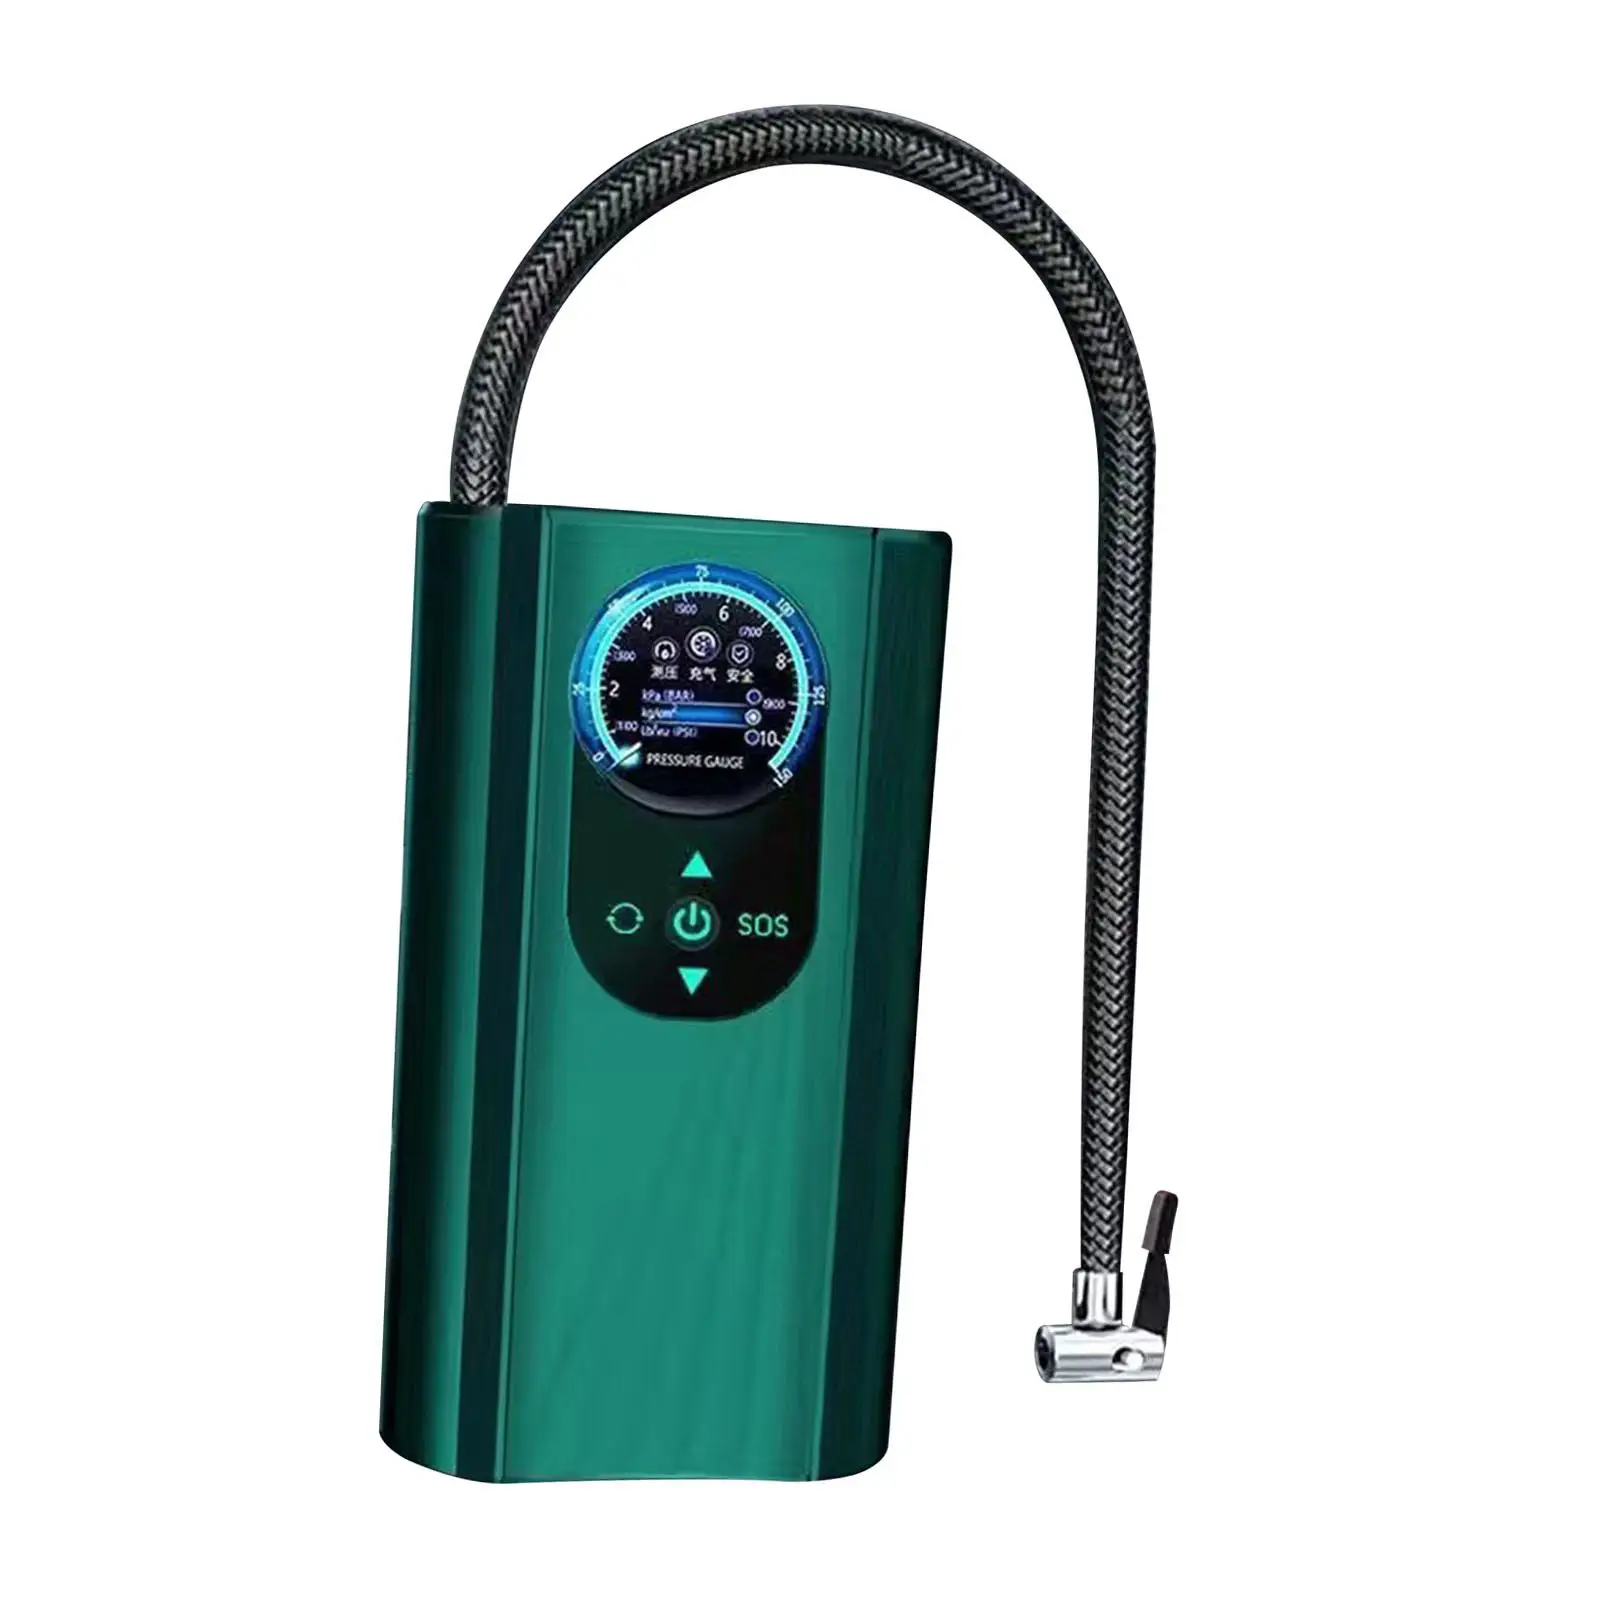 Portable Air Compressor Fast Electric Tire Pump for Bicycle Motorcycle